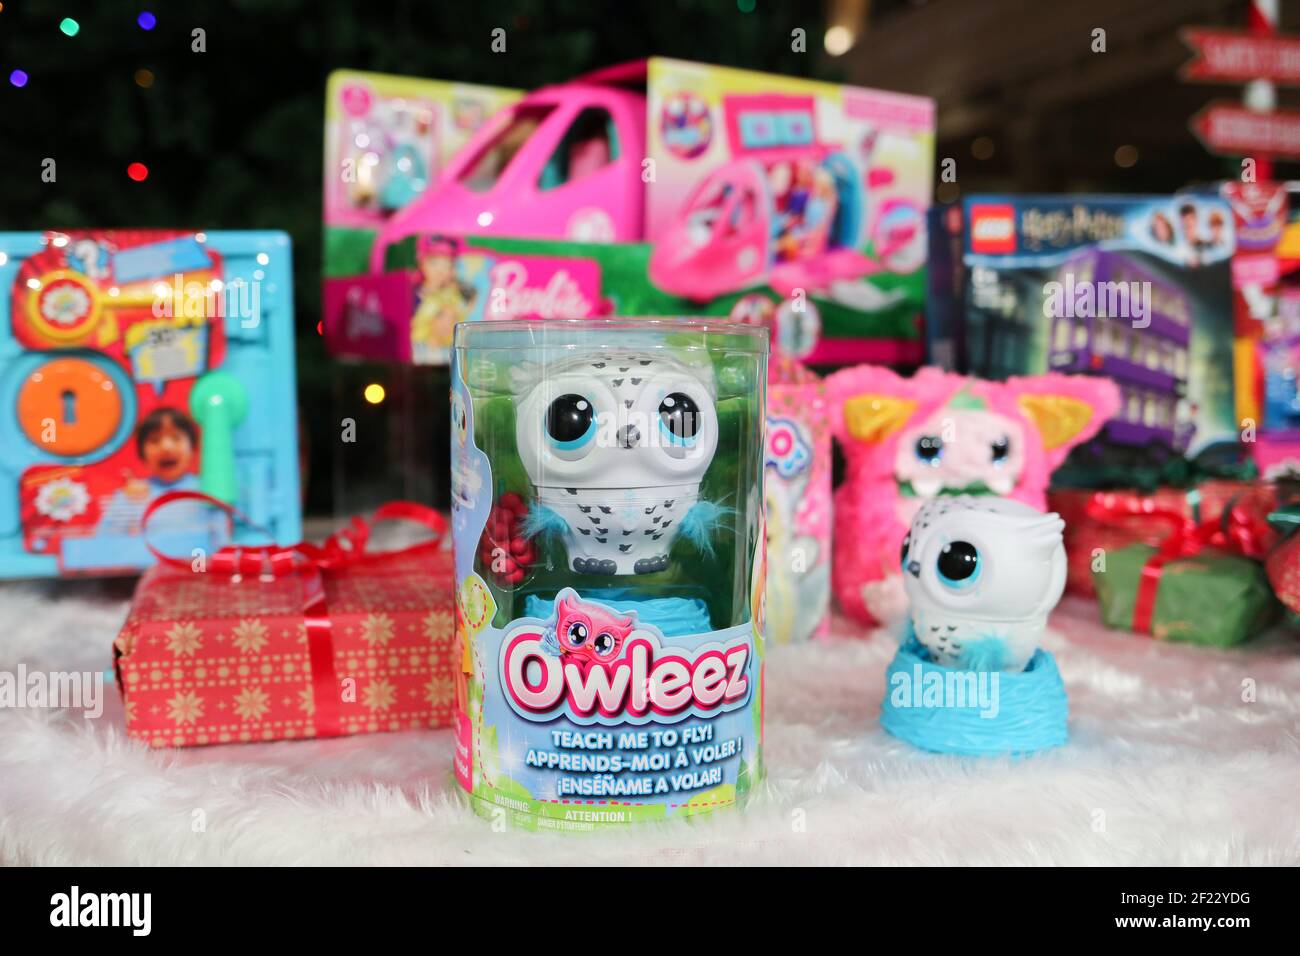 'Owleez', one of the Top 12 toys this Christmas unveiled at Dreamtoys 2019 in London. The list, issued by the Toy Retailers Association predicts what will be hot this Christmas. It is selected by a panel of retailers and industry experts and is fiercely independent of toy manufacturers and makers. Photo credit should read: Katie Collins/EMPICS Entertainment/Alamy Stock Photo